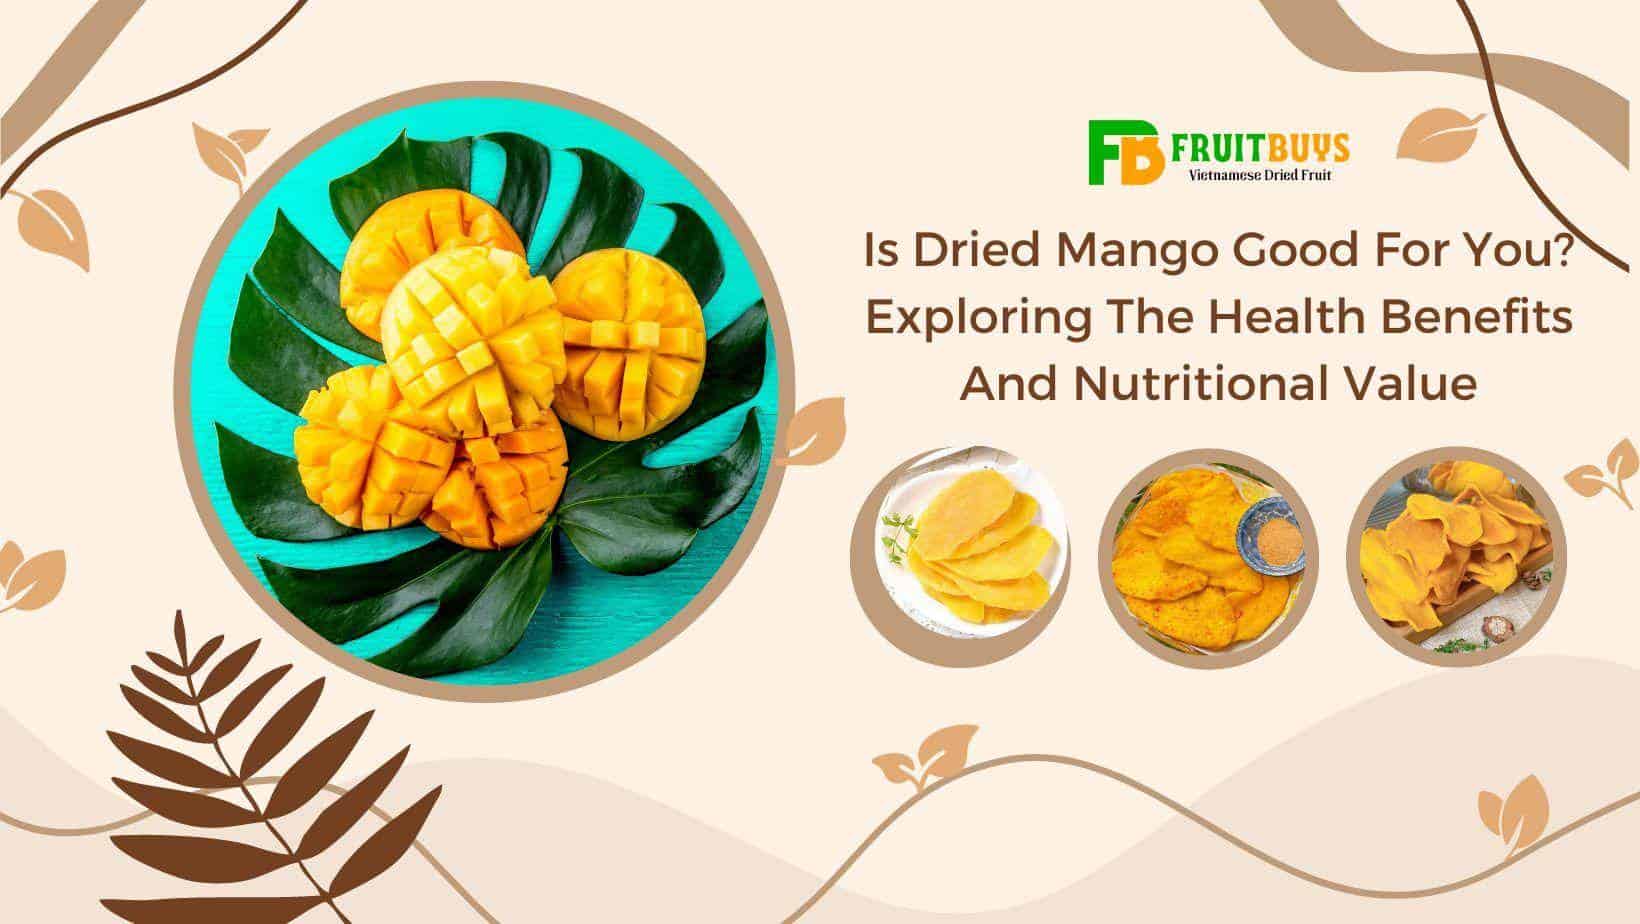 FruitBuys Vietnam  Is Dried Mango Good For You Exploring The Health Benefits And Nutritional Value